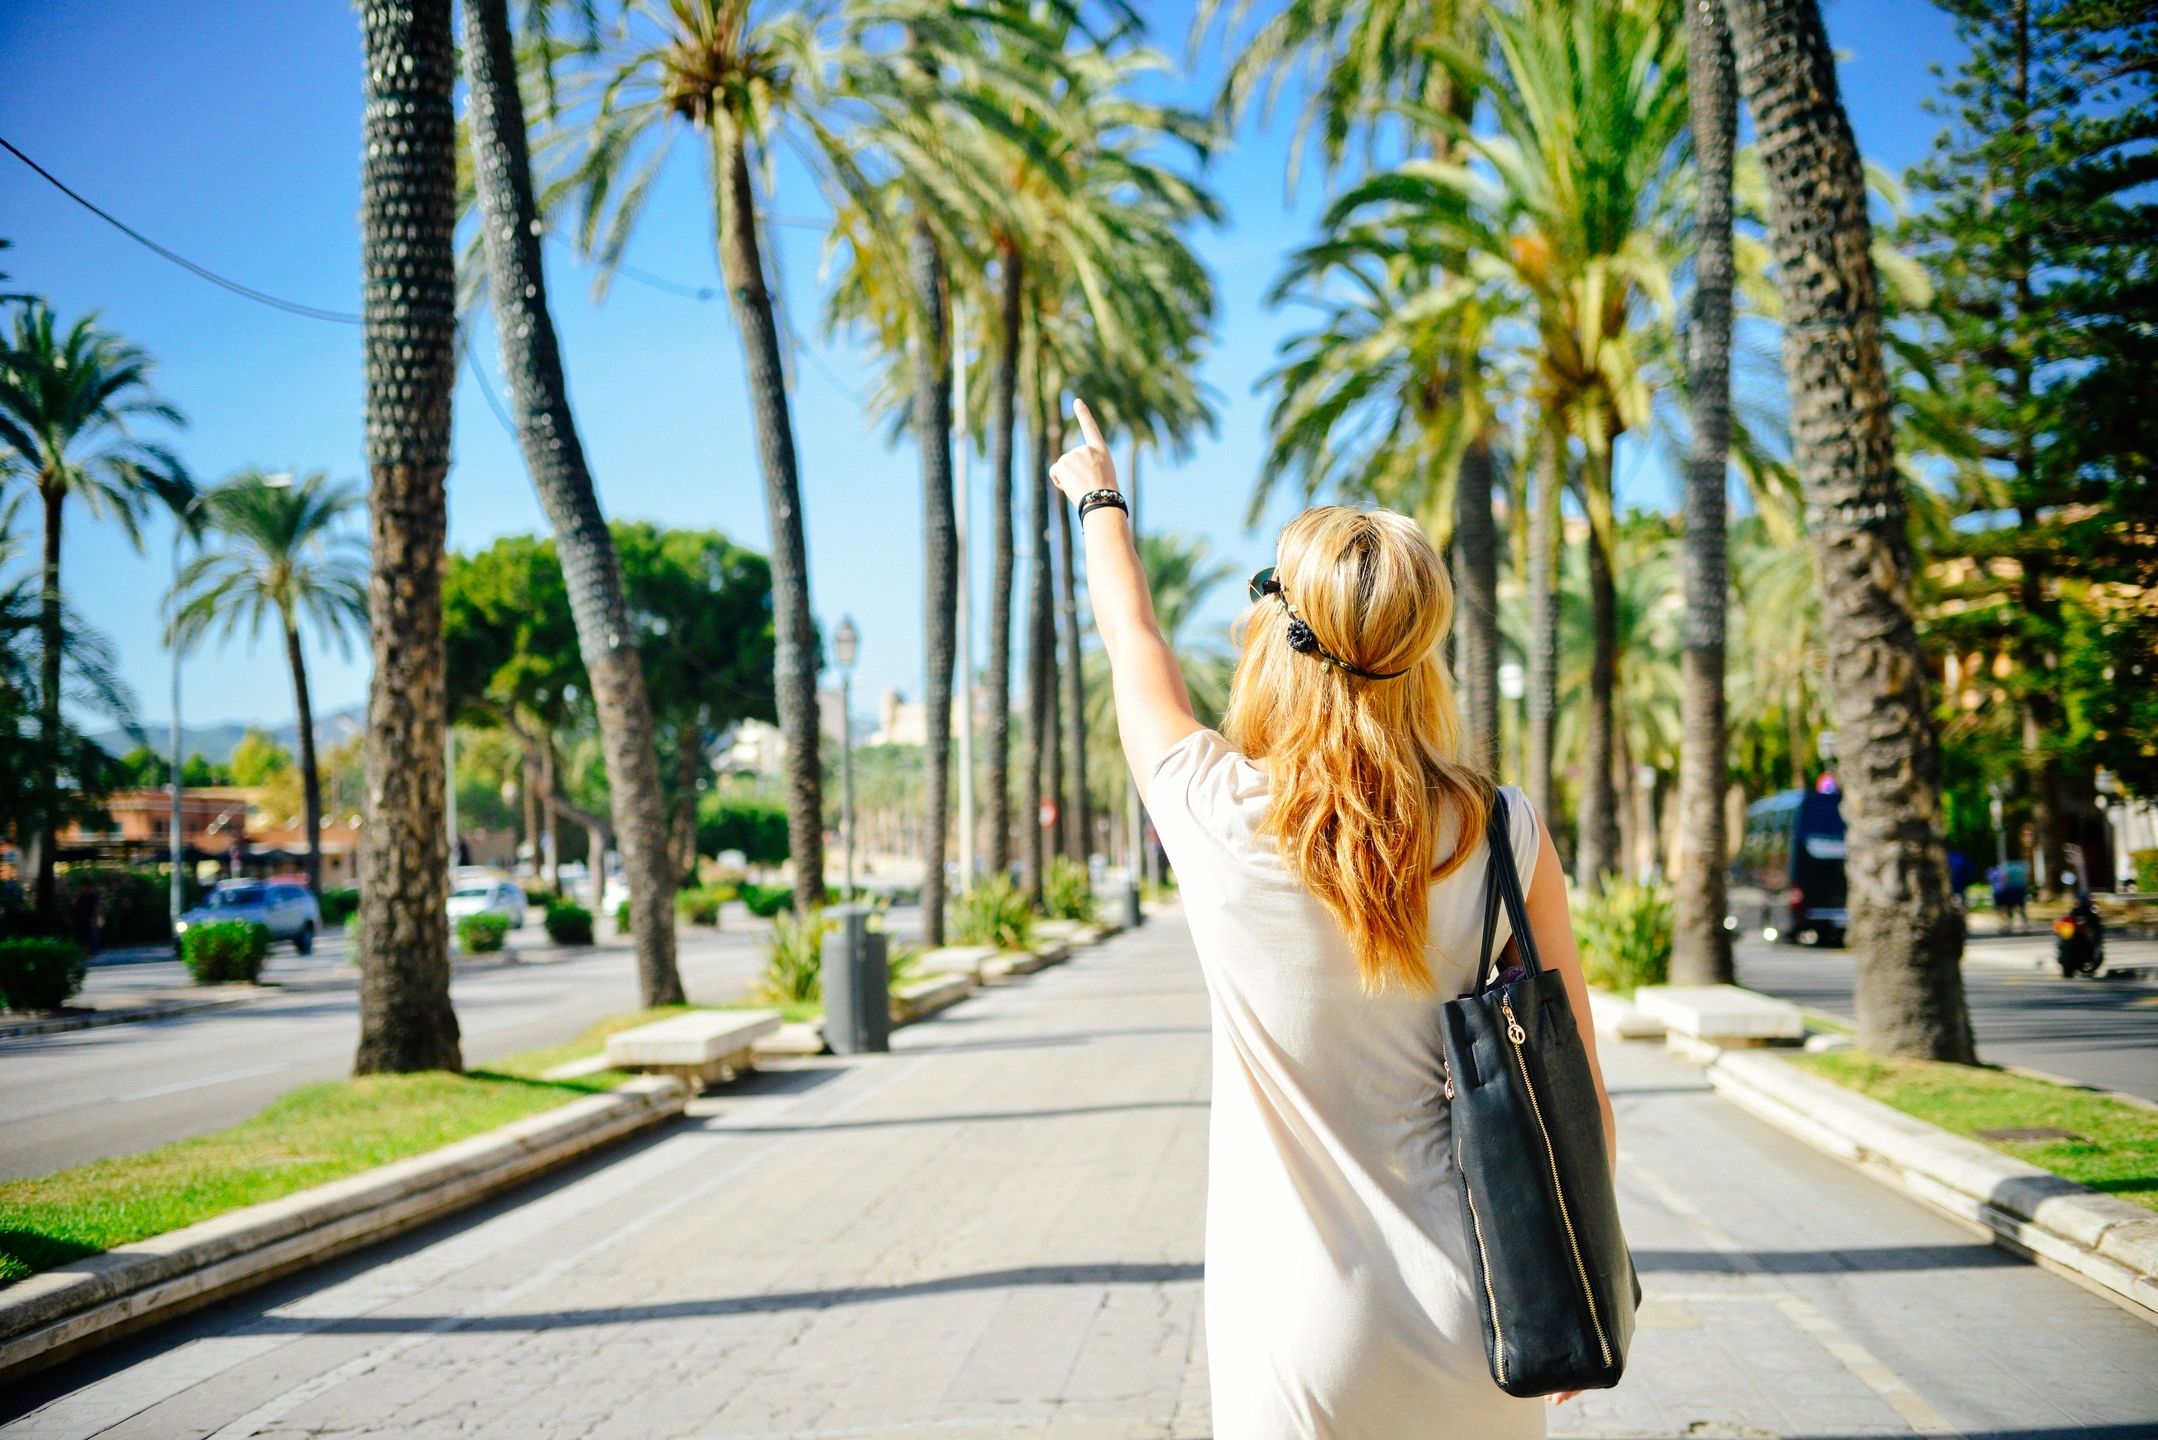 Woman on a retreat pointing at palm trees.